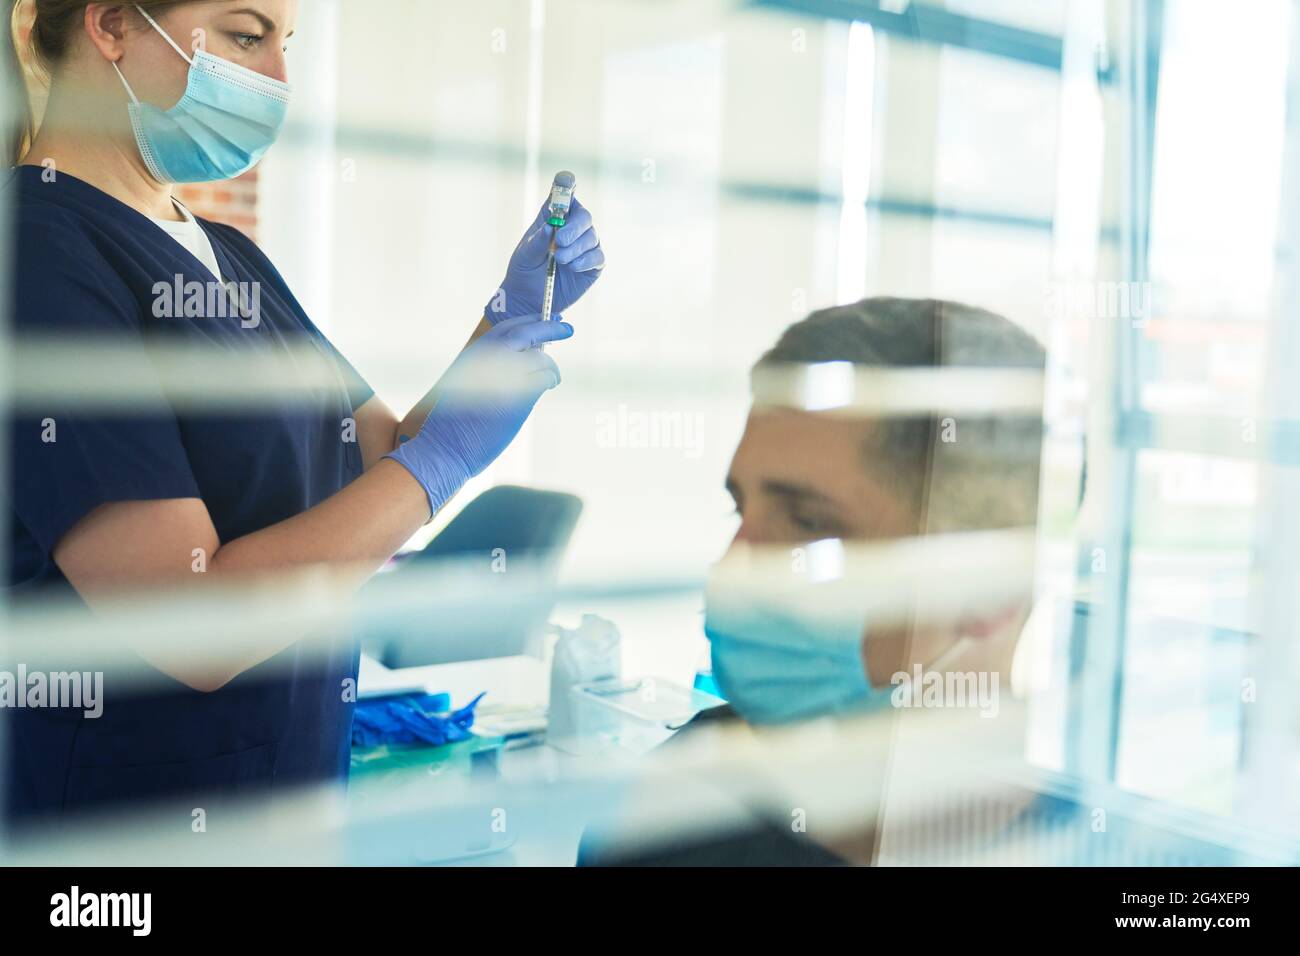 Female frontline worker preparing COVID-19 vaccine dose for patient at clinic Stock Photo